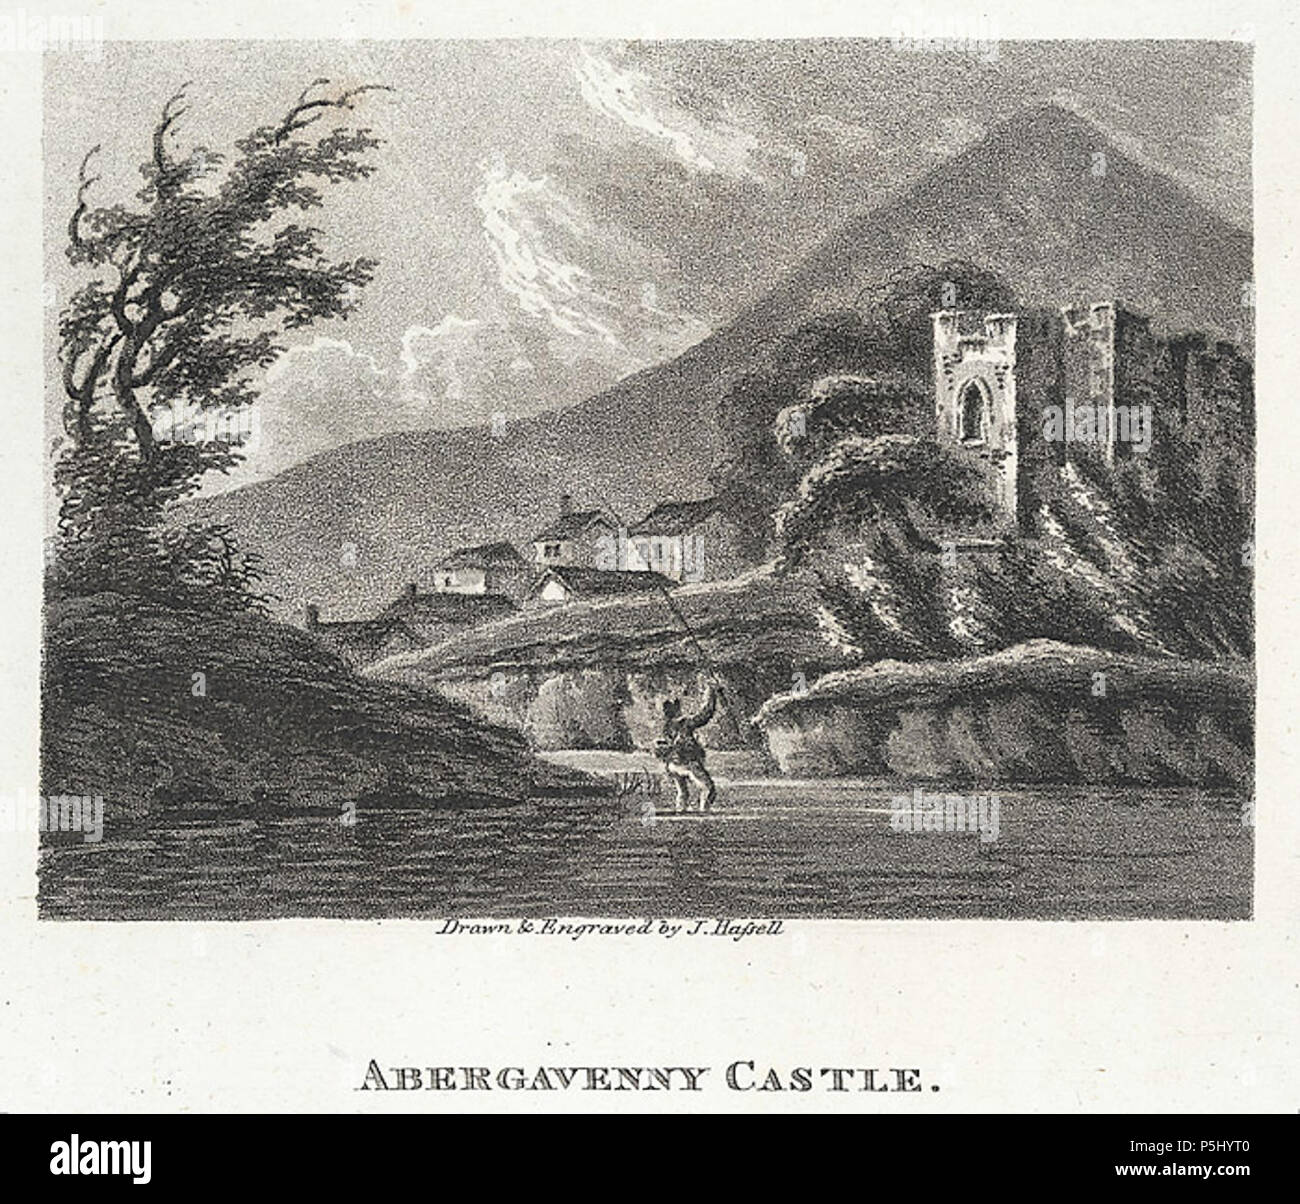 Abergavenny Castle [graphic] / drawn & engraved by J. Hassell.. 1 print : aquatint, b&w ; image size 77 x 105 mm., paper size 158 x 244 mm. 1807. Hassell, J. 53 Abergavenny Castle (3374855) Stock Photo